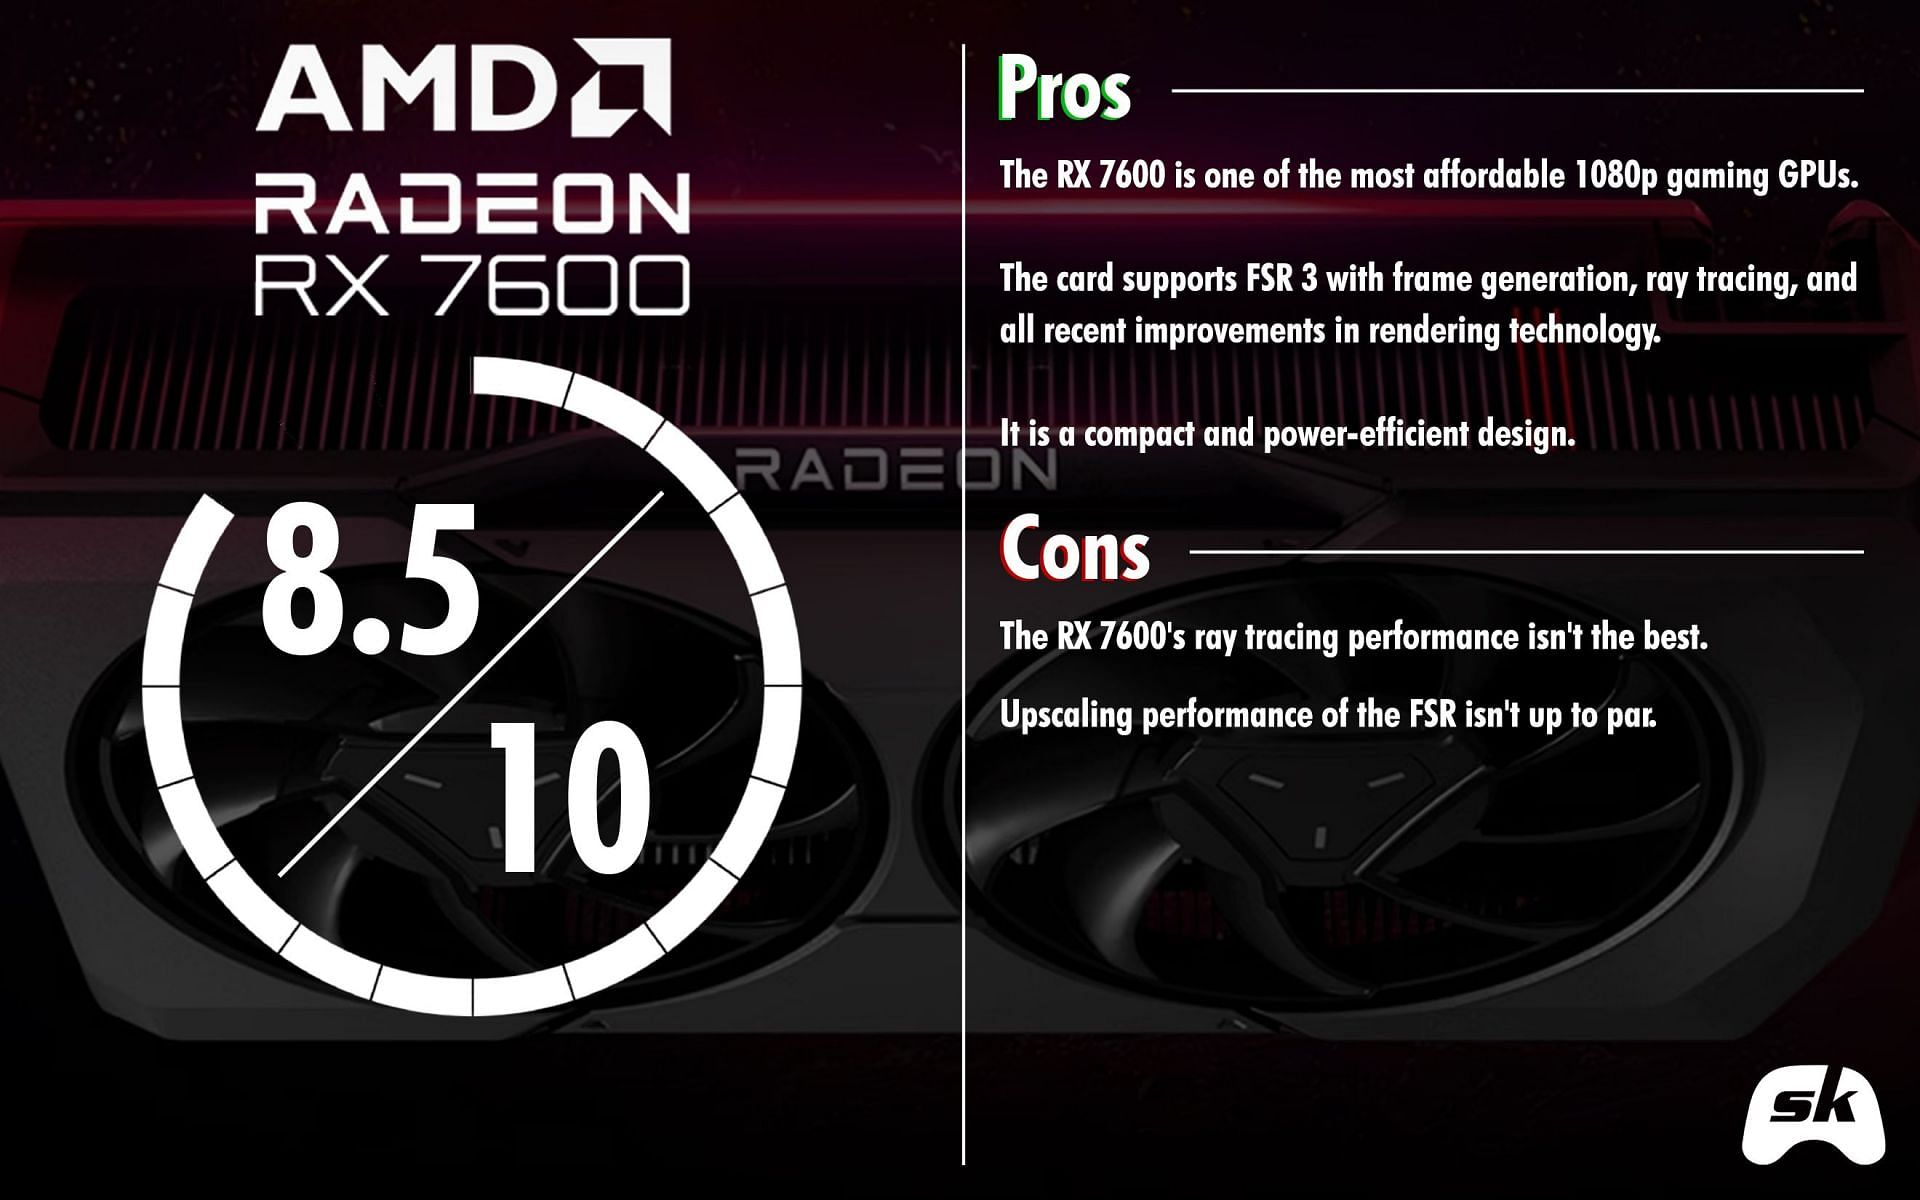 The AMD Radeon RX 7600 is a superb graphics card for 1080p gaming (Image via Sportskeeda)